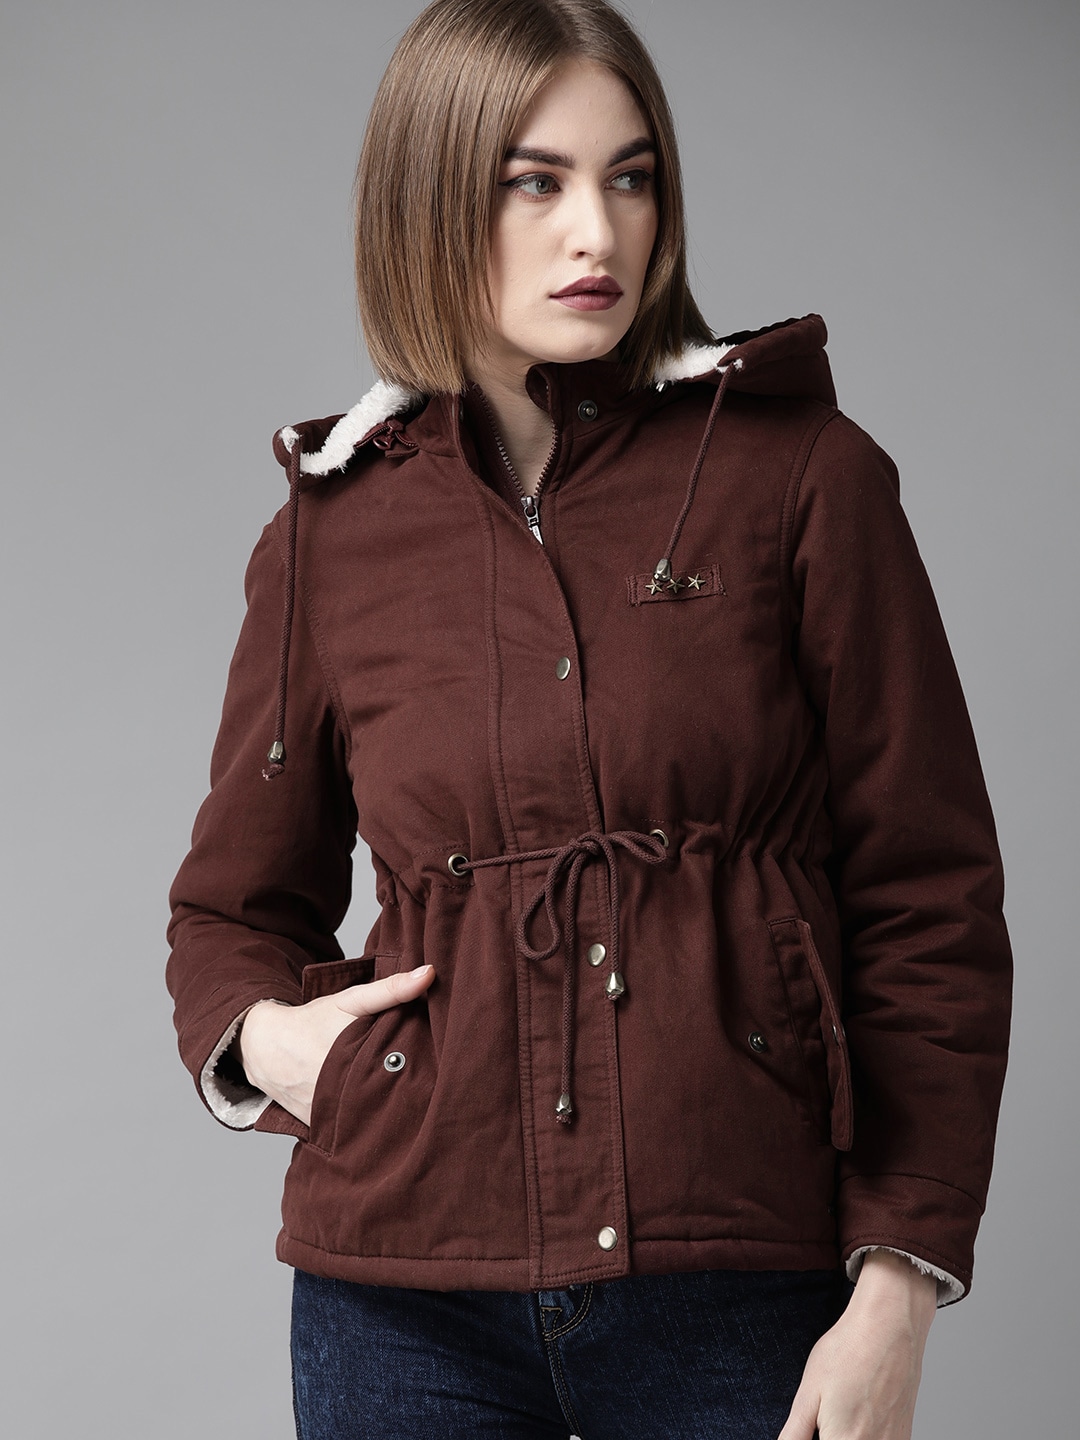 The Roadster Lifestyle Co Women Burgundy Solid Padded Jacket Price in India